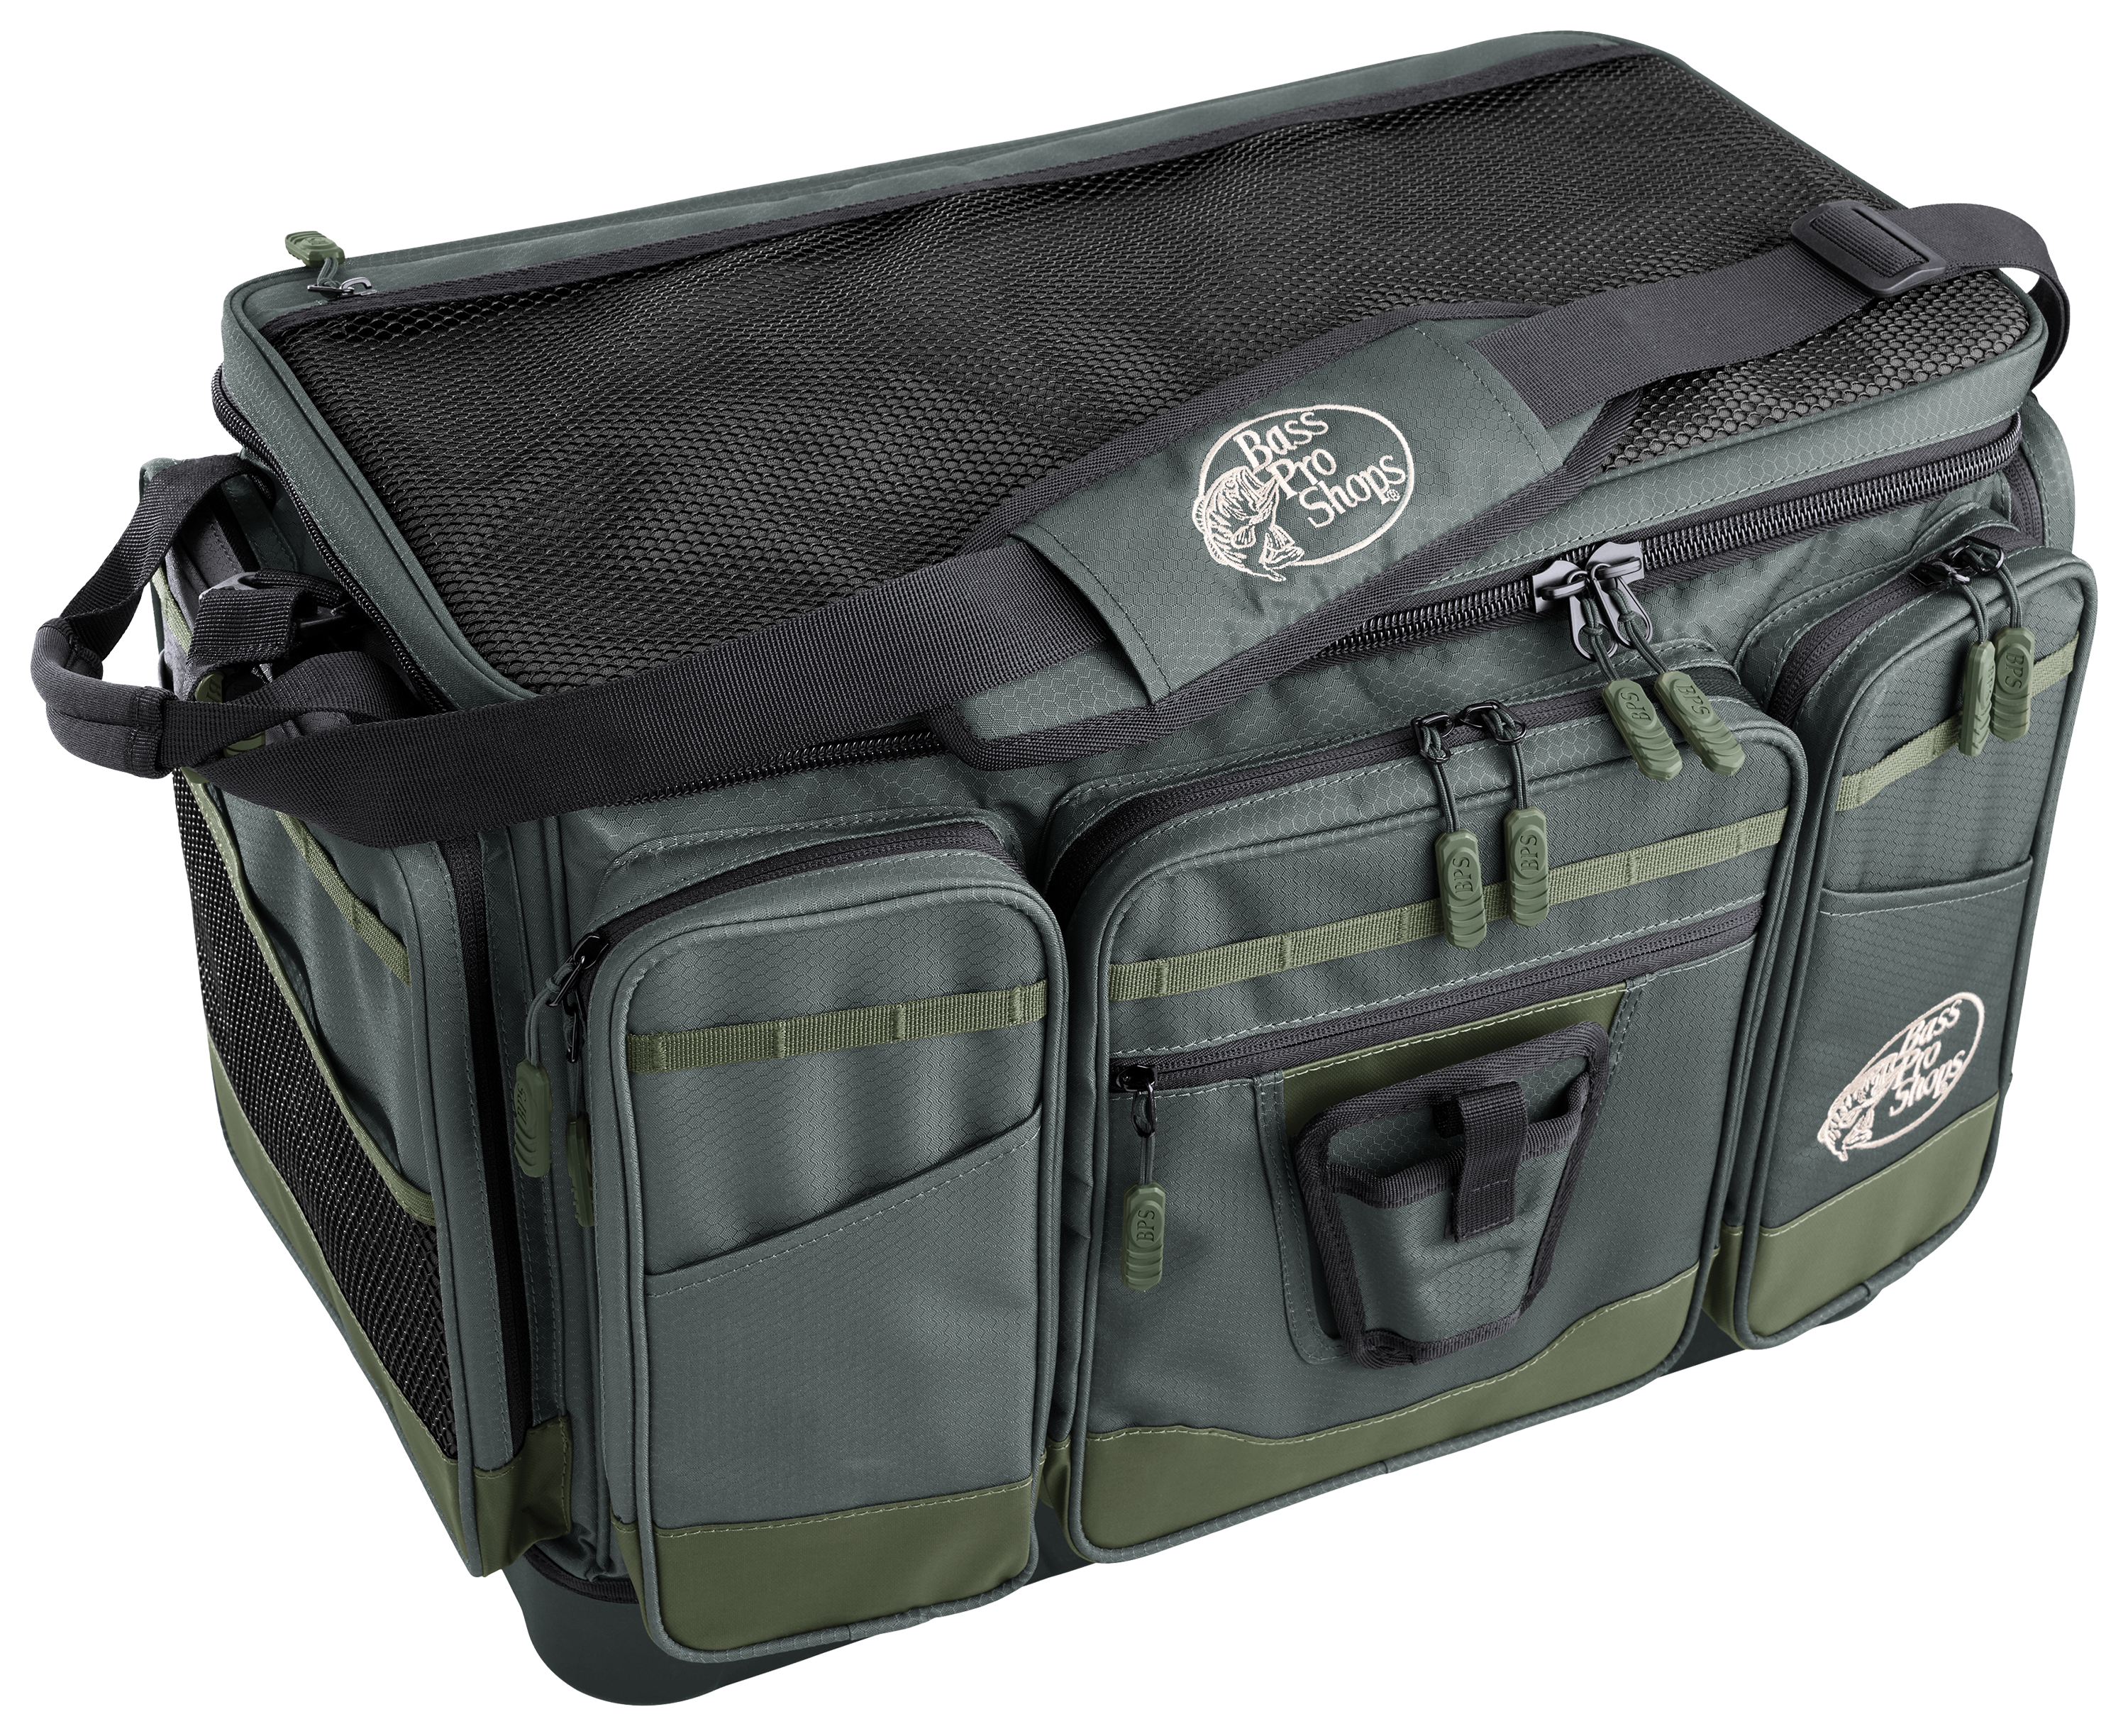 Bass Pro Xtreme Qualifier 370 Tackle Bag System - reSettled Life